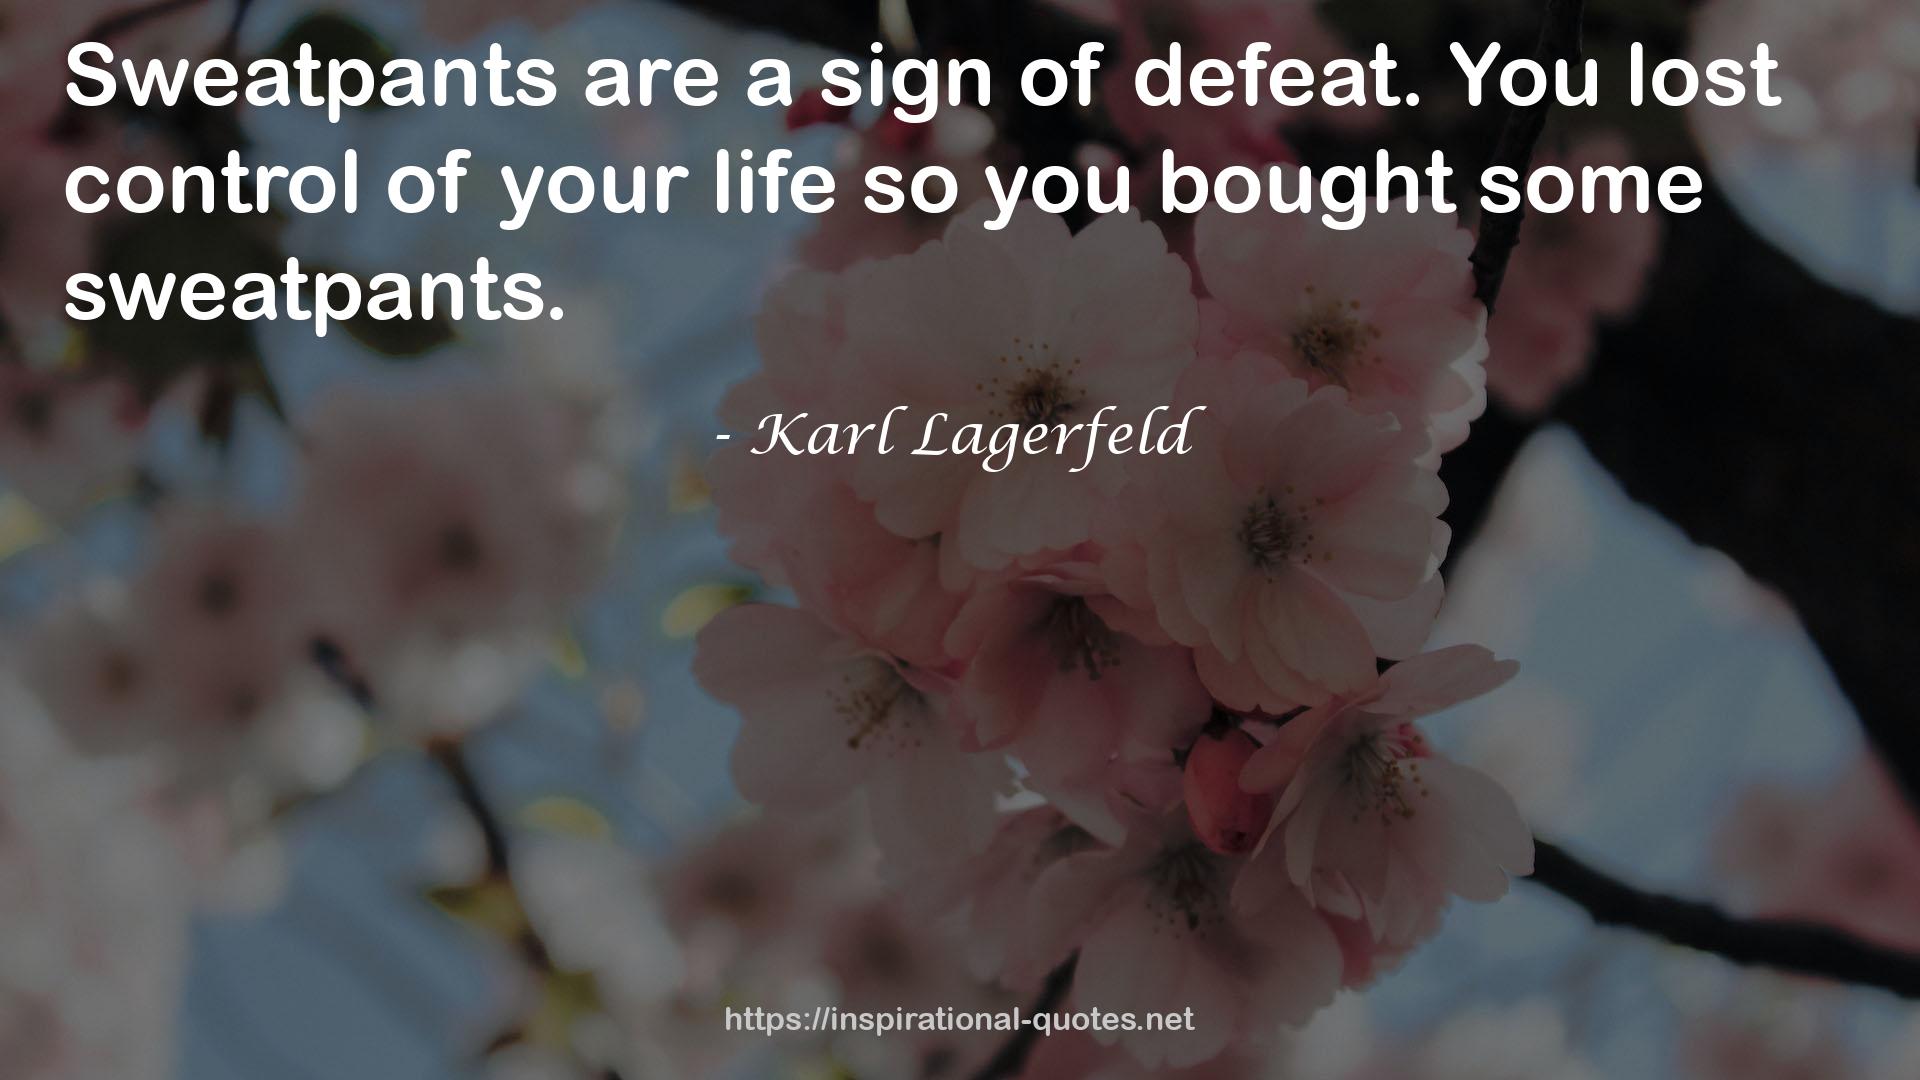 Karl Lagerfeld QUOTES